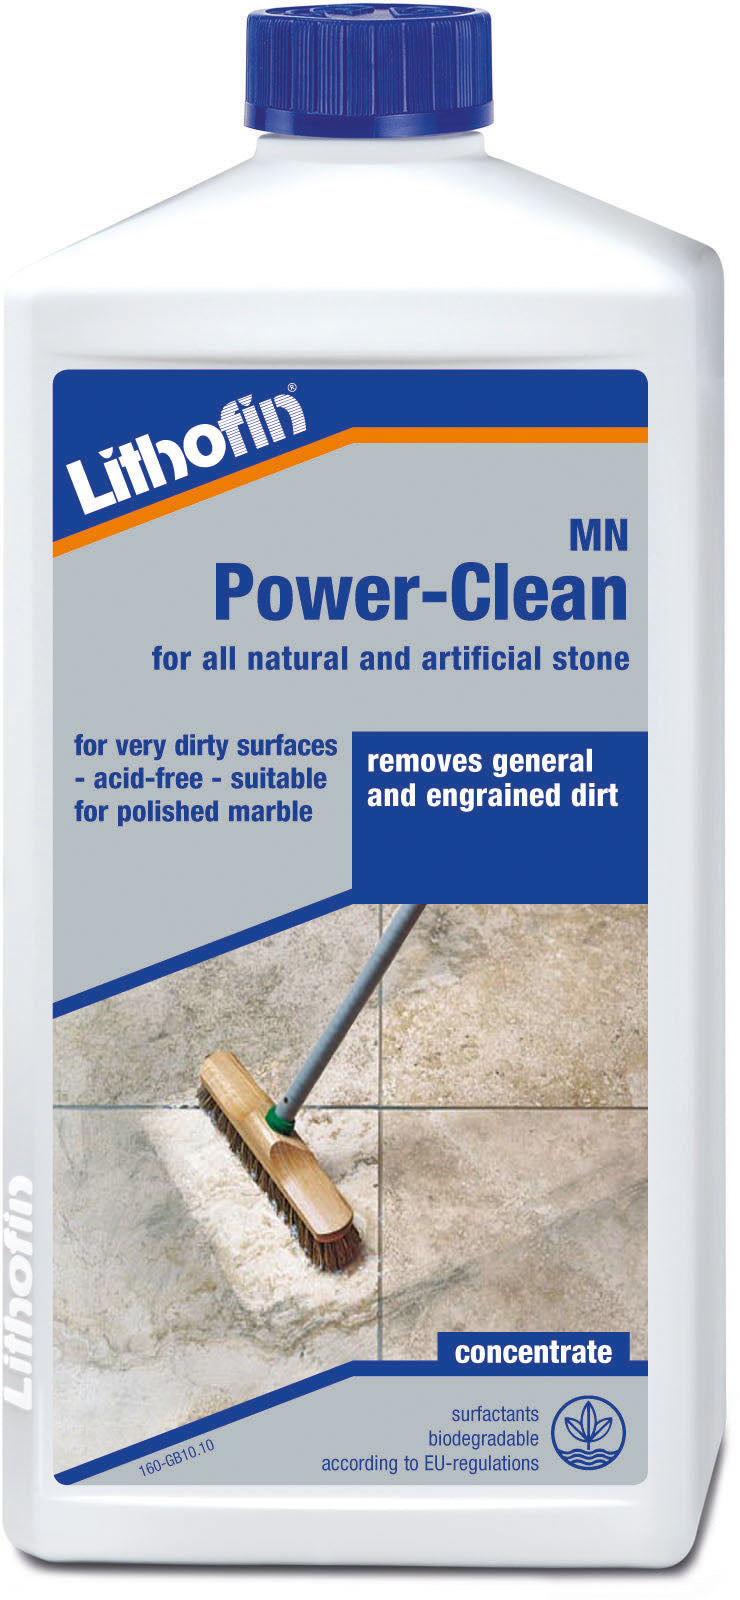 Lithofin mn power clean for all natural and artificial surfaces 